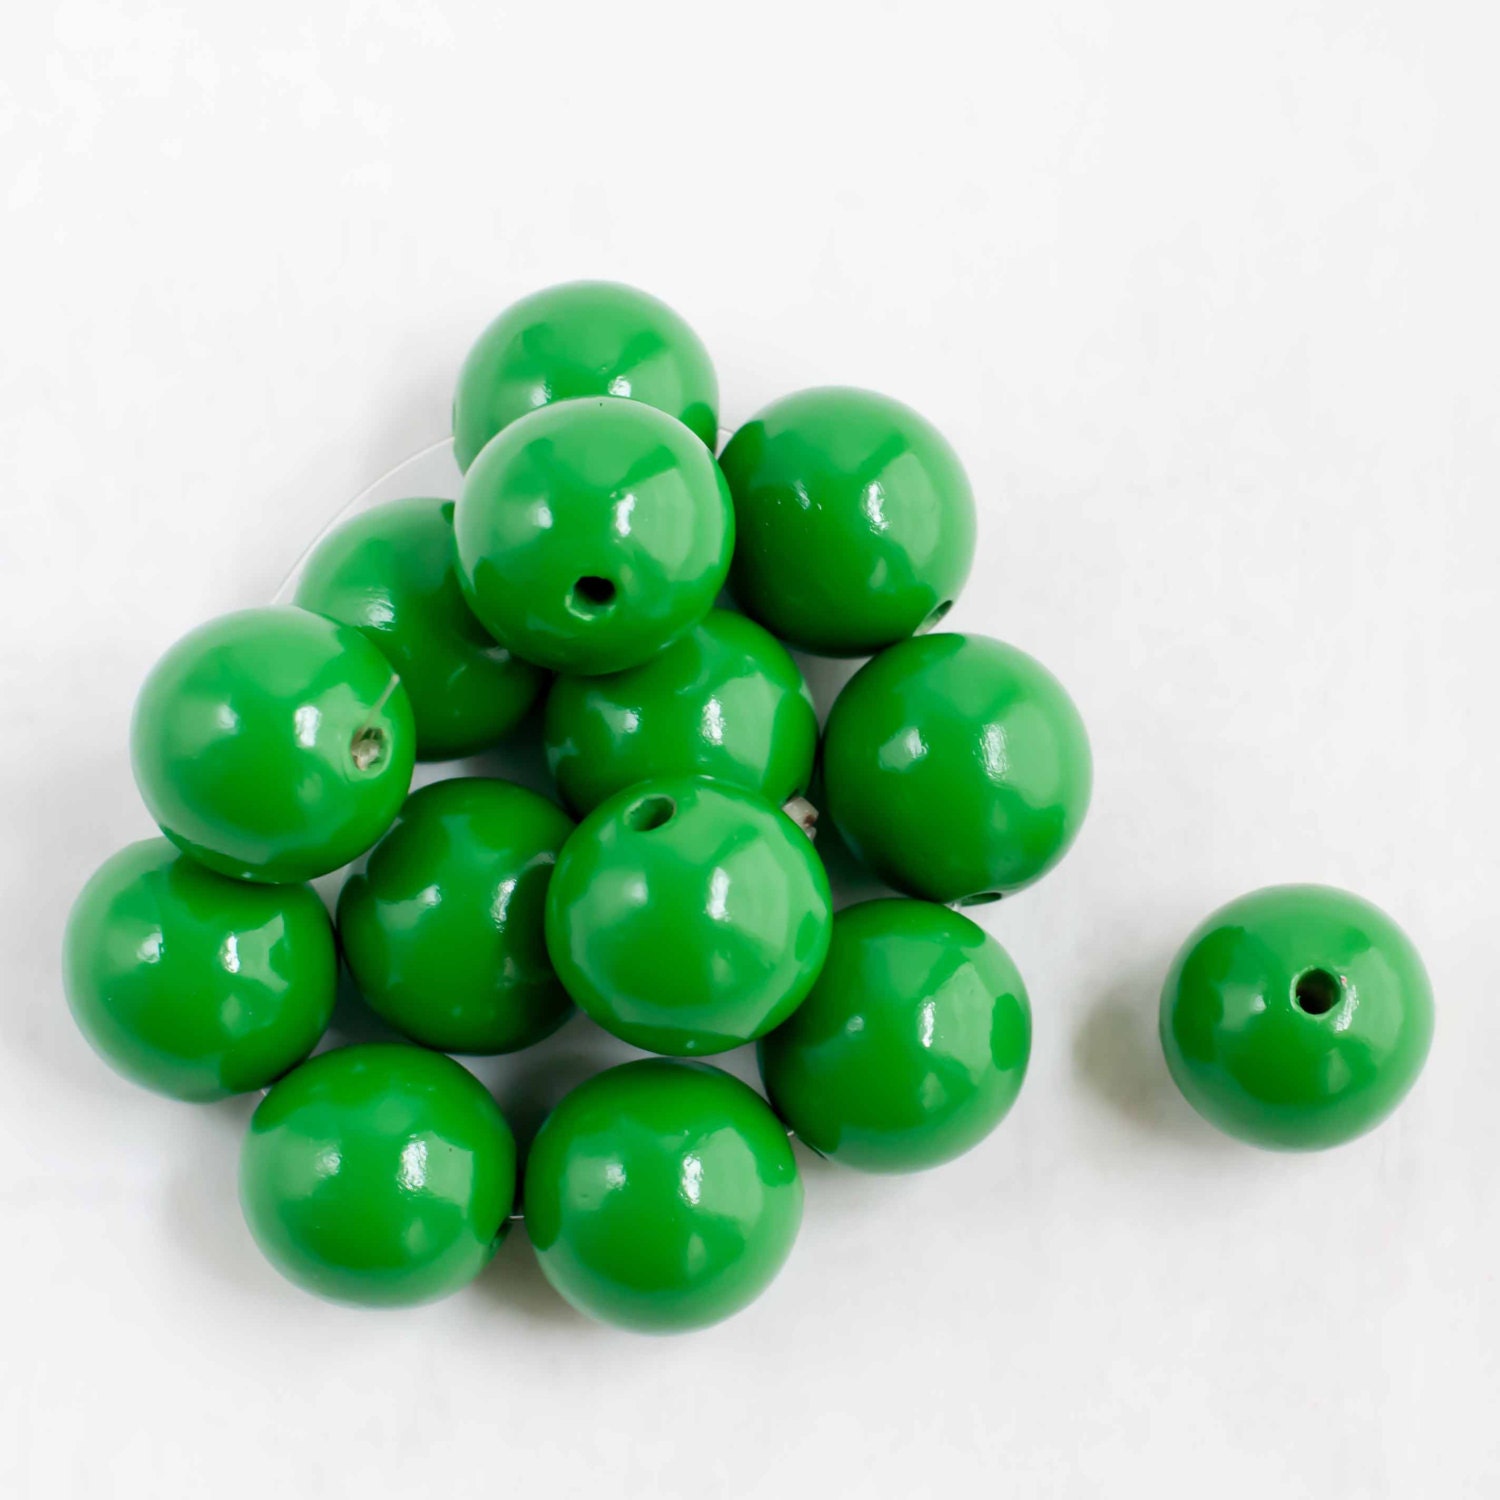 1 Inch Green Wood Beads-Jewelry Supply -Gift for Mom - Eco-Friendly Supply -Green Wood Beads - WoodBeJewels